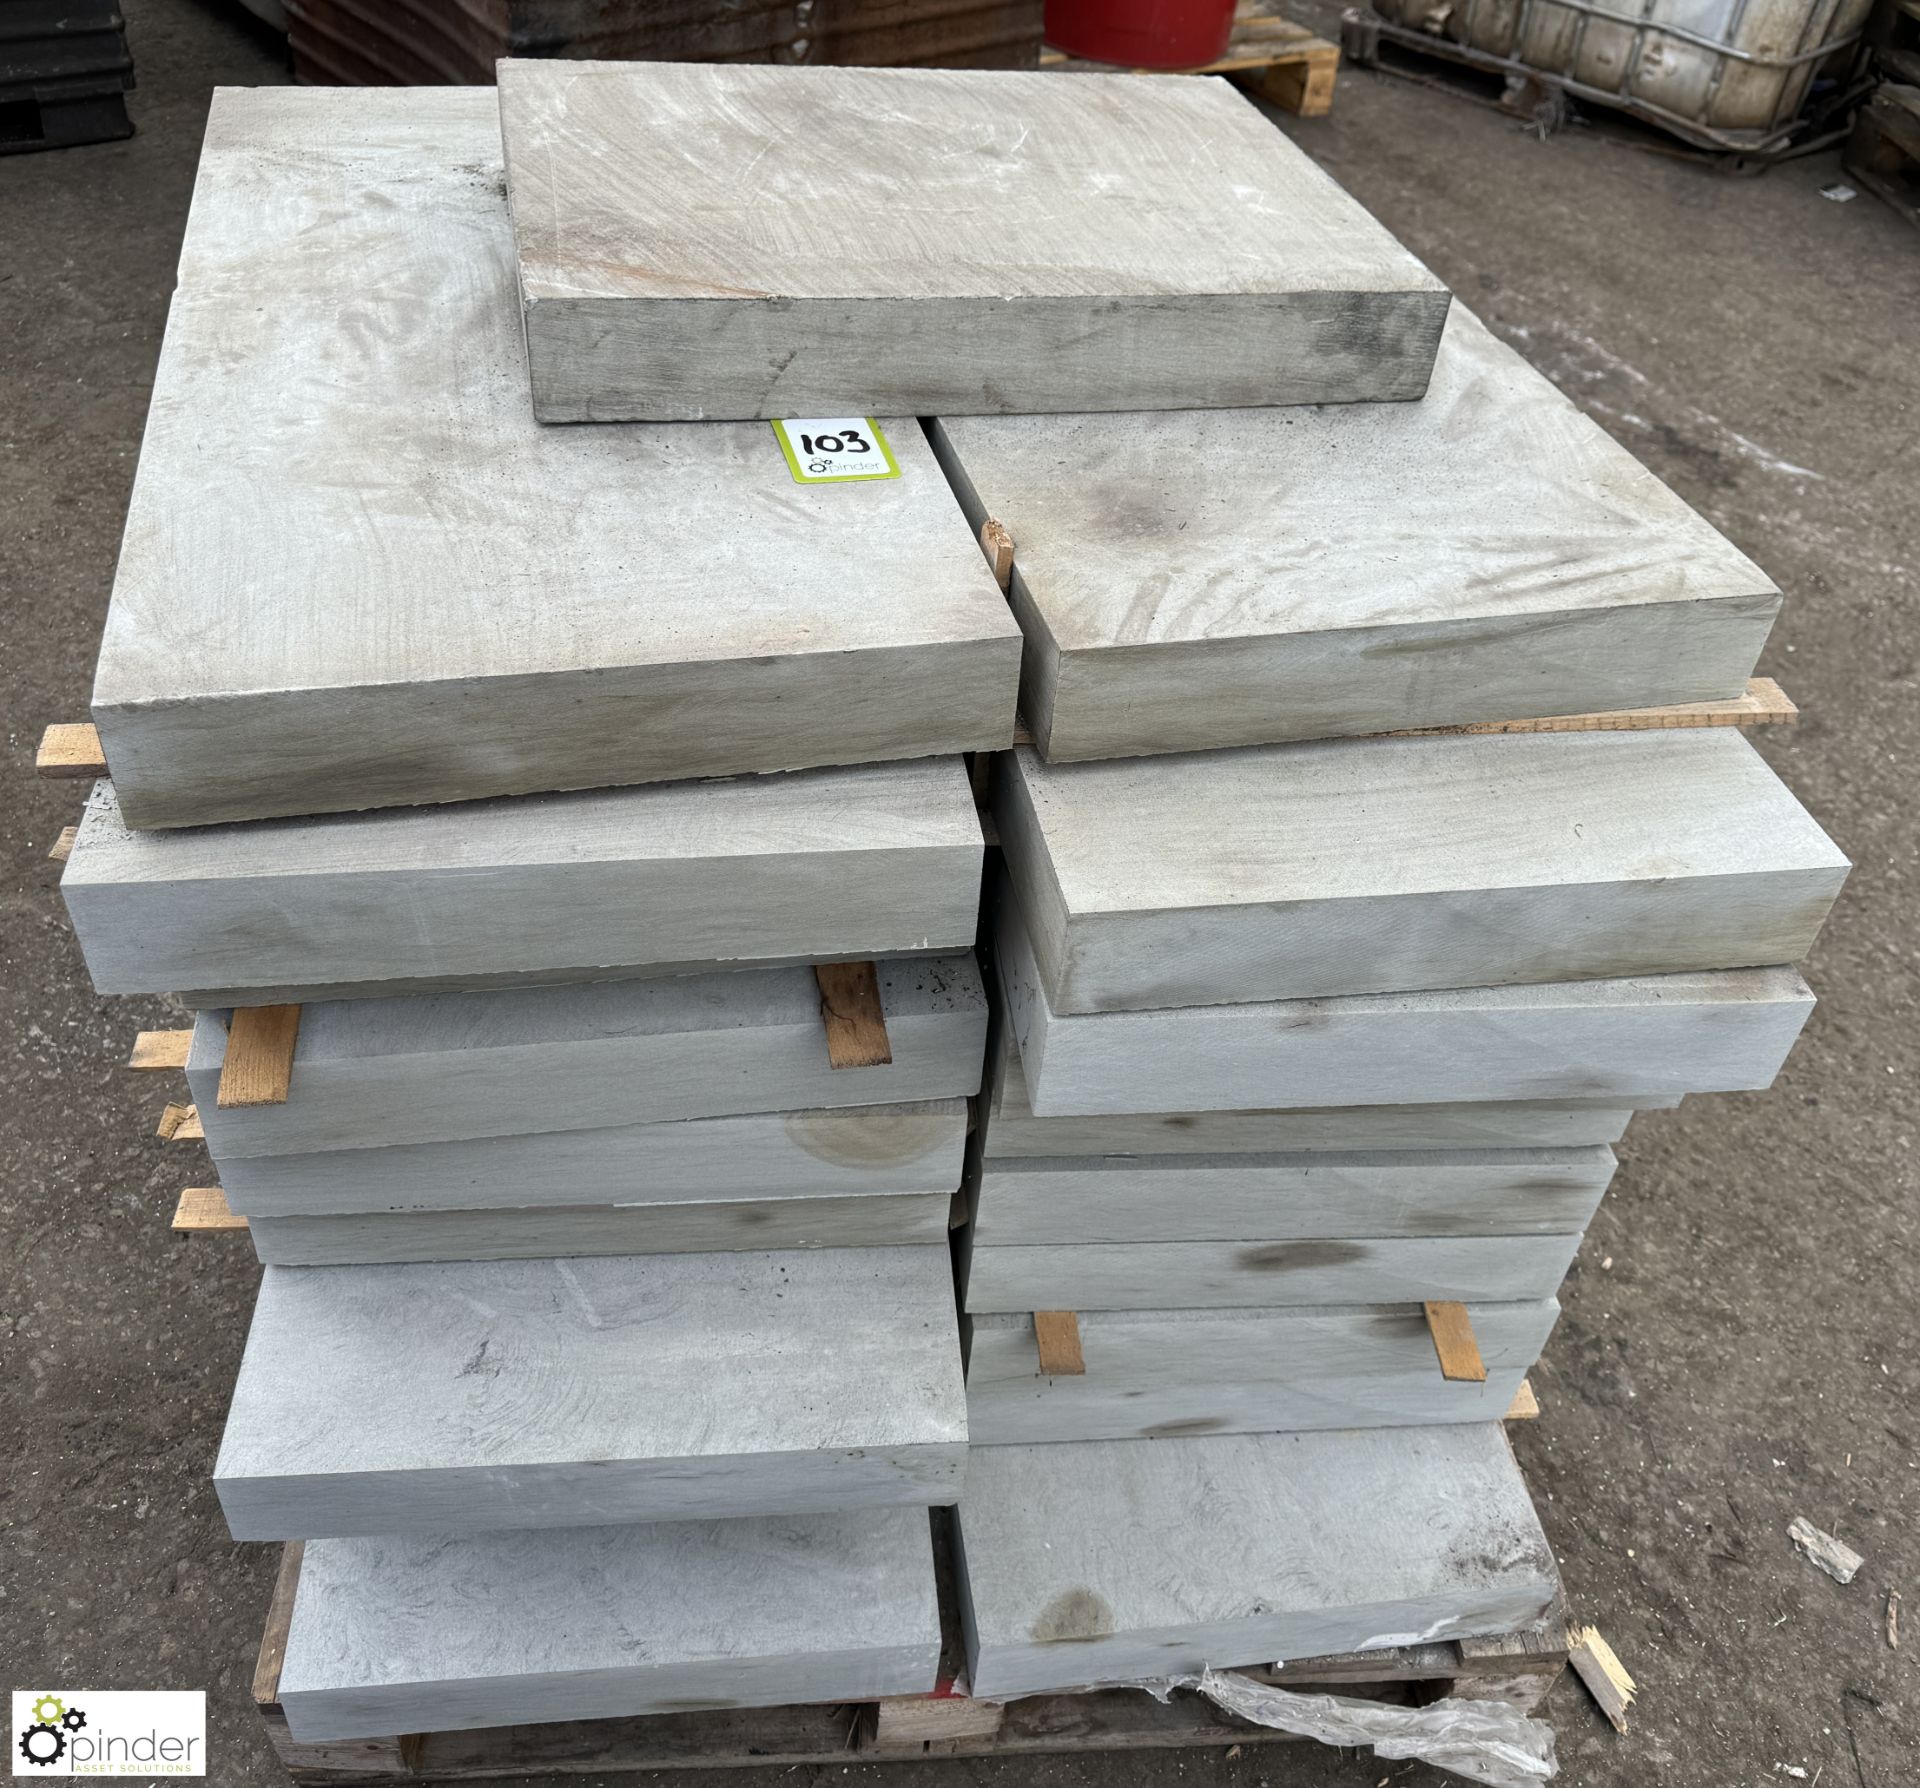 Pallet Sandstone Slabs from Millstone grit, various lengths x 450mm x 75mm